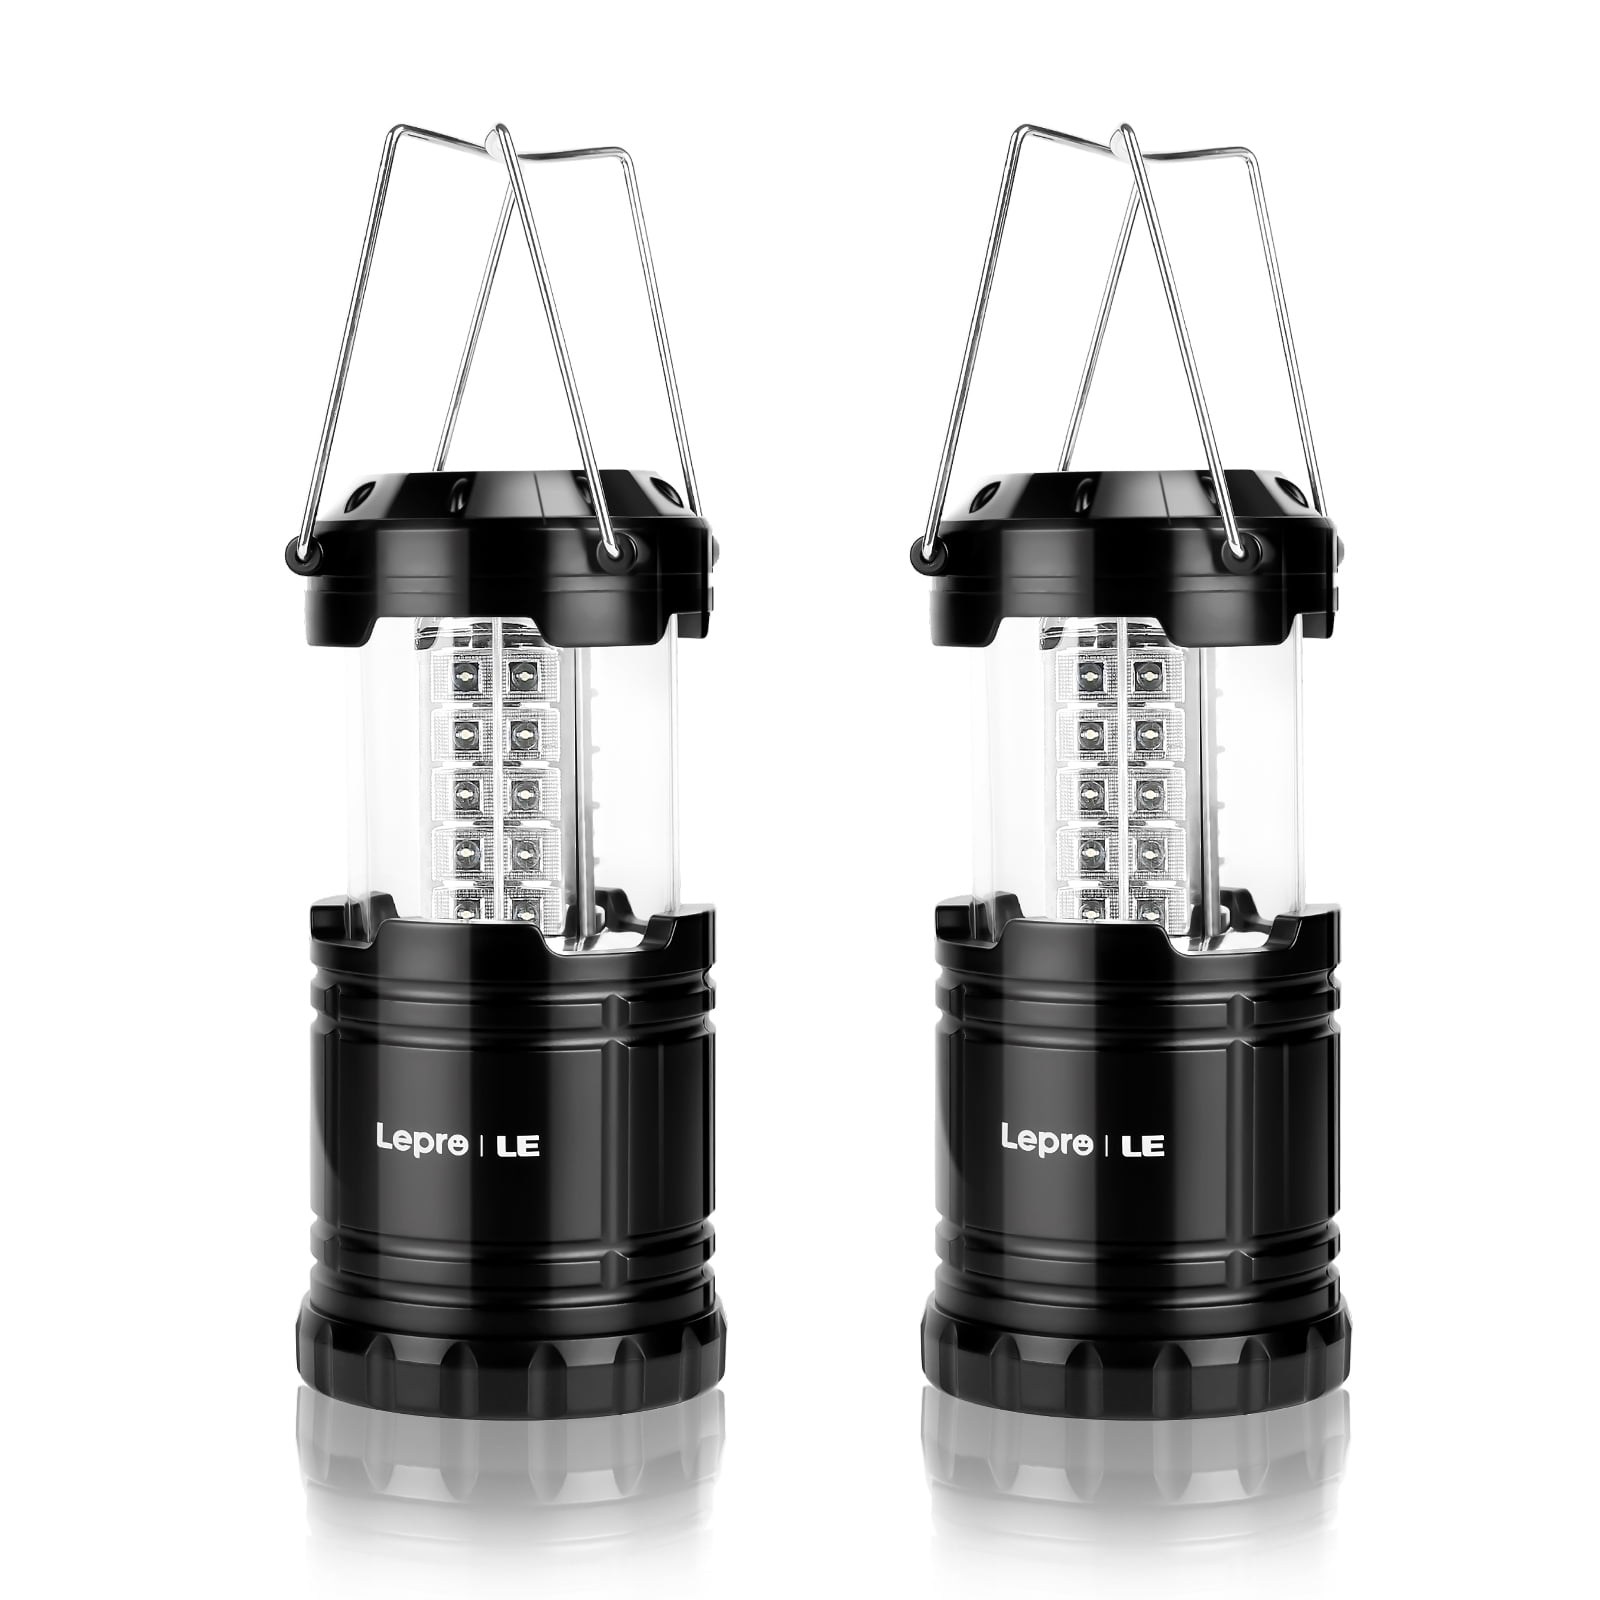 Camping Lantern, 4 Pack Brightness Adjustable LED Camping Lights,  Collapsible IPX4 Waterproof Survival Lanterns for Power Outages, Home  Emergency, Camping, Hiking, Hurricane 